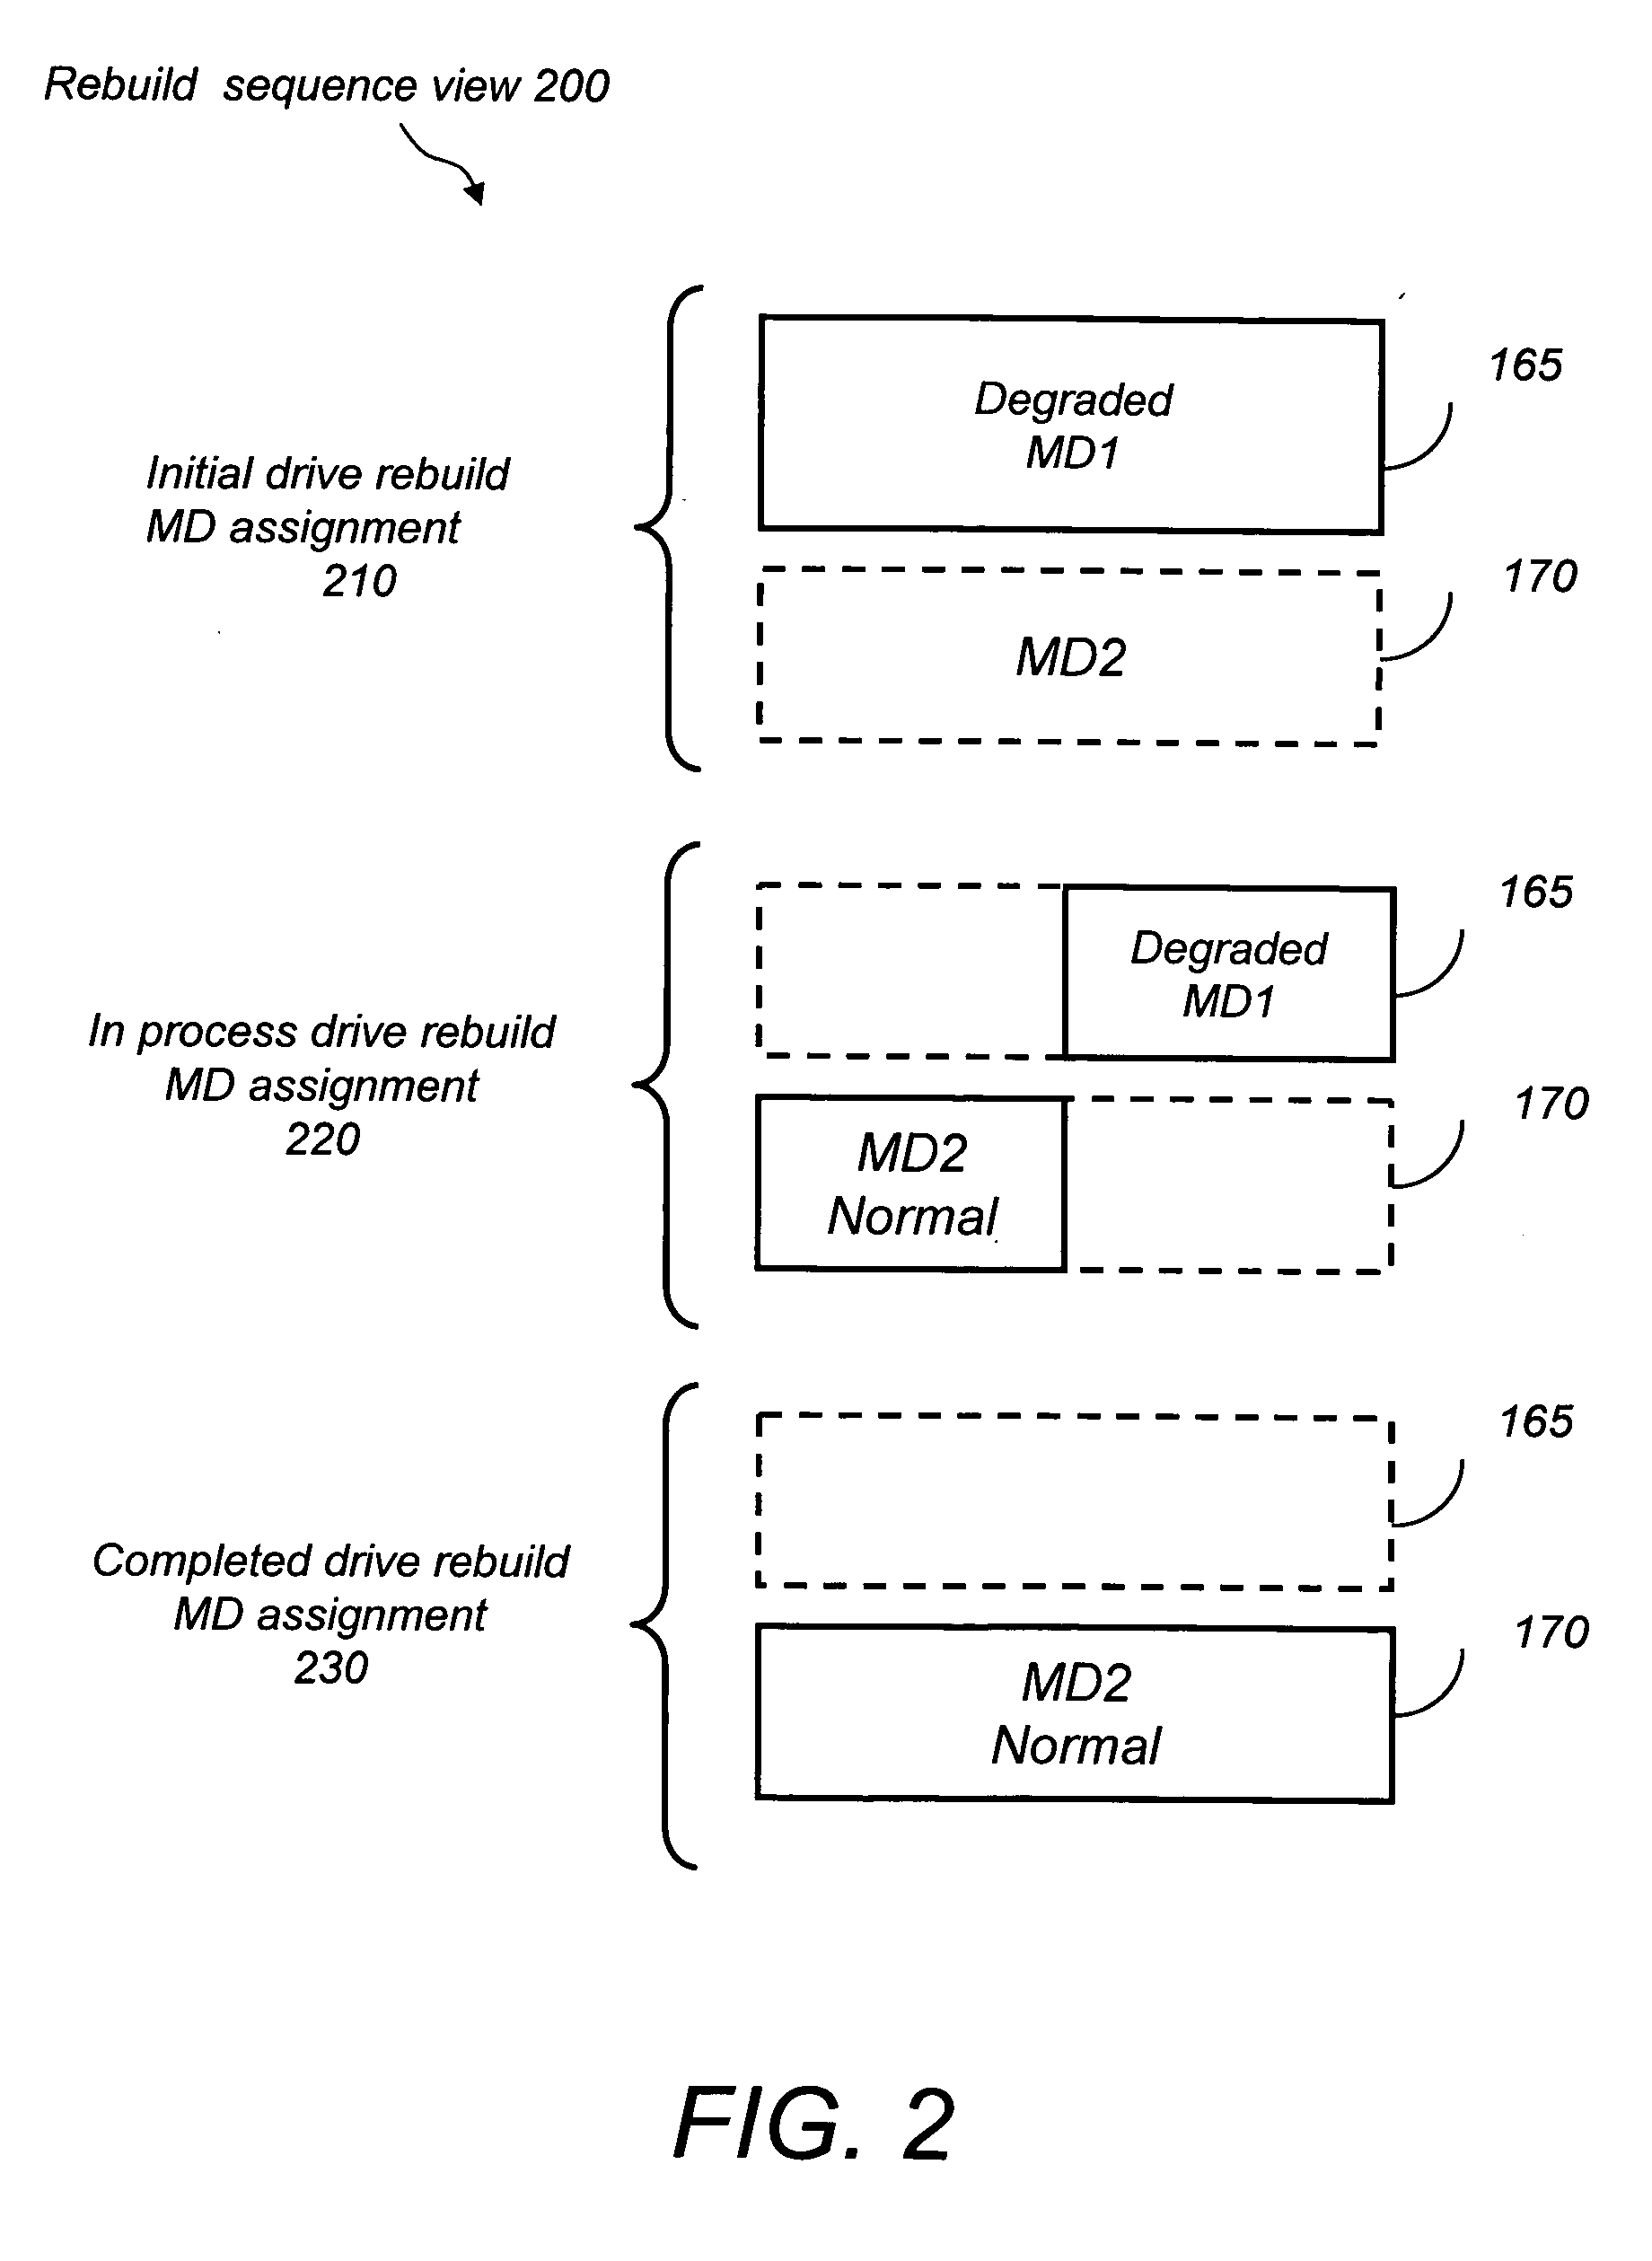 Method of controlling the system performance and reliability impact of hard disk drive rebuild